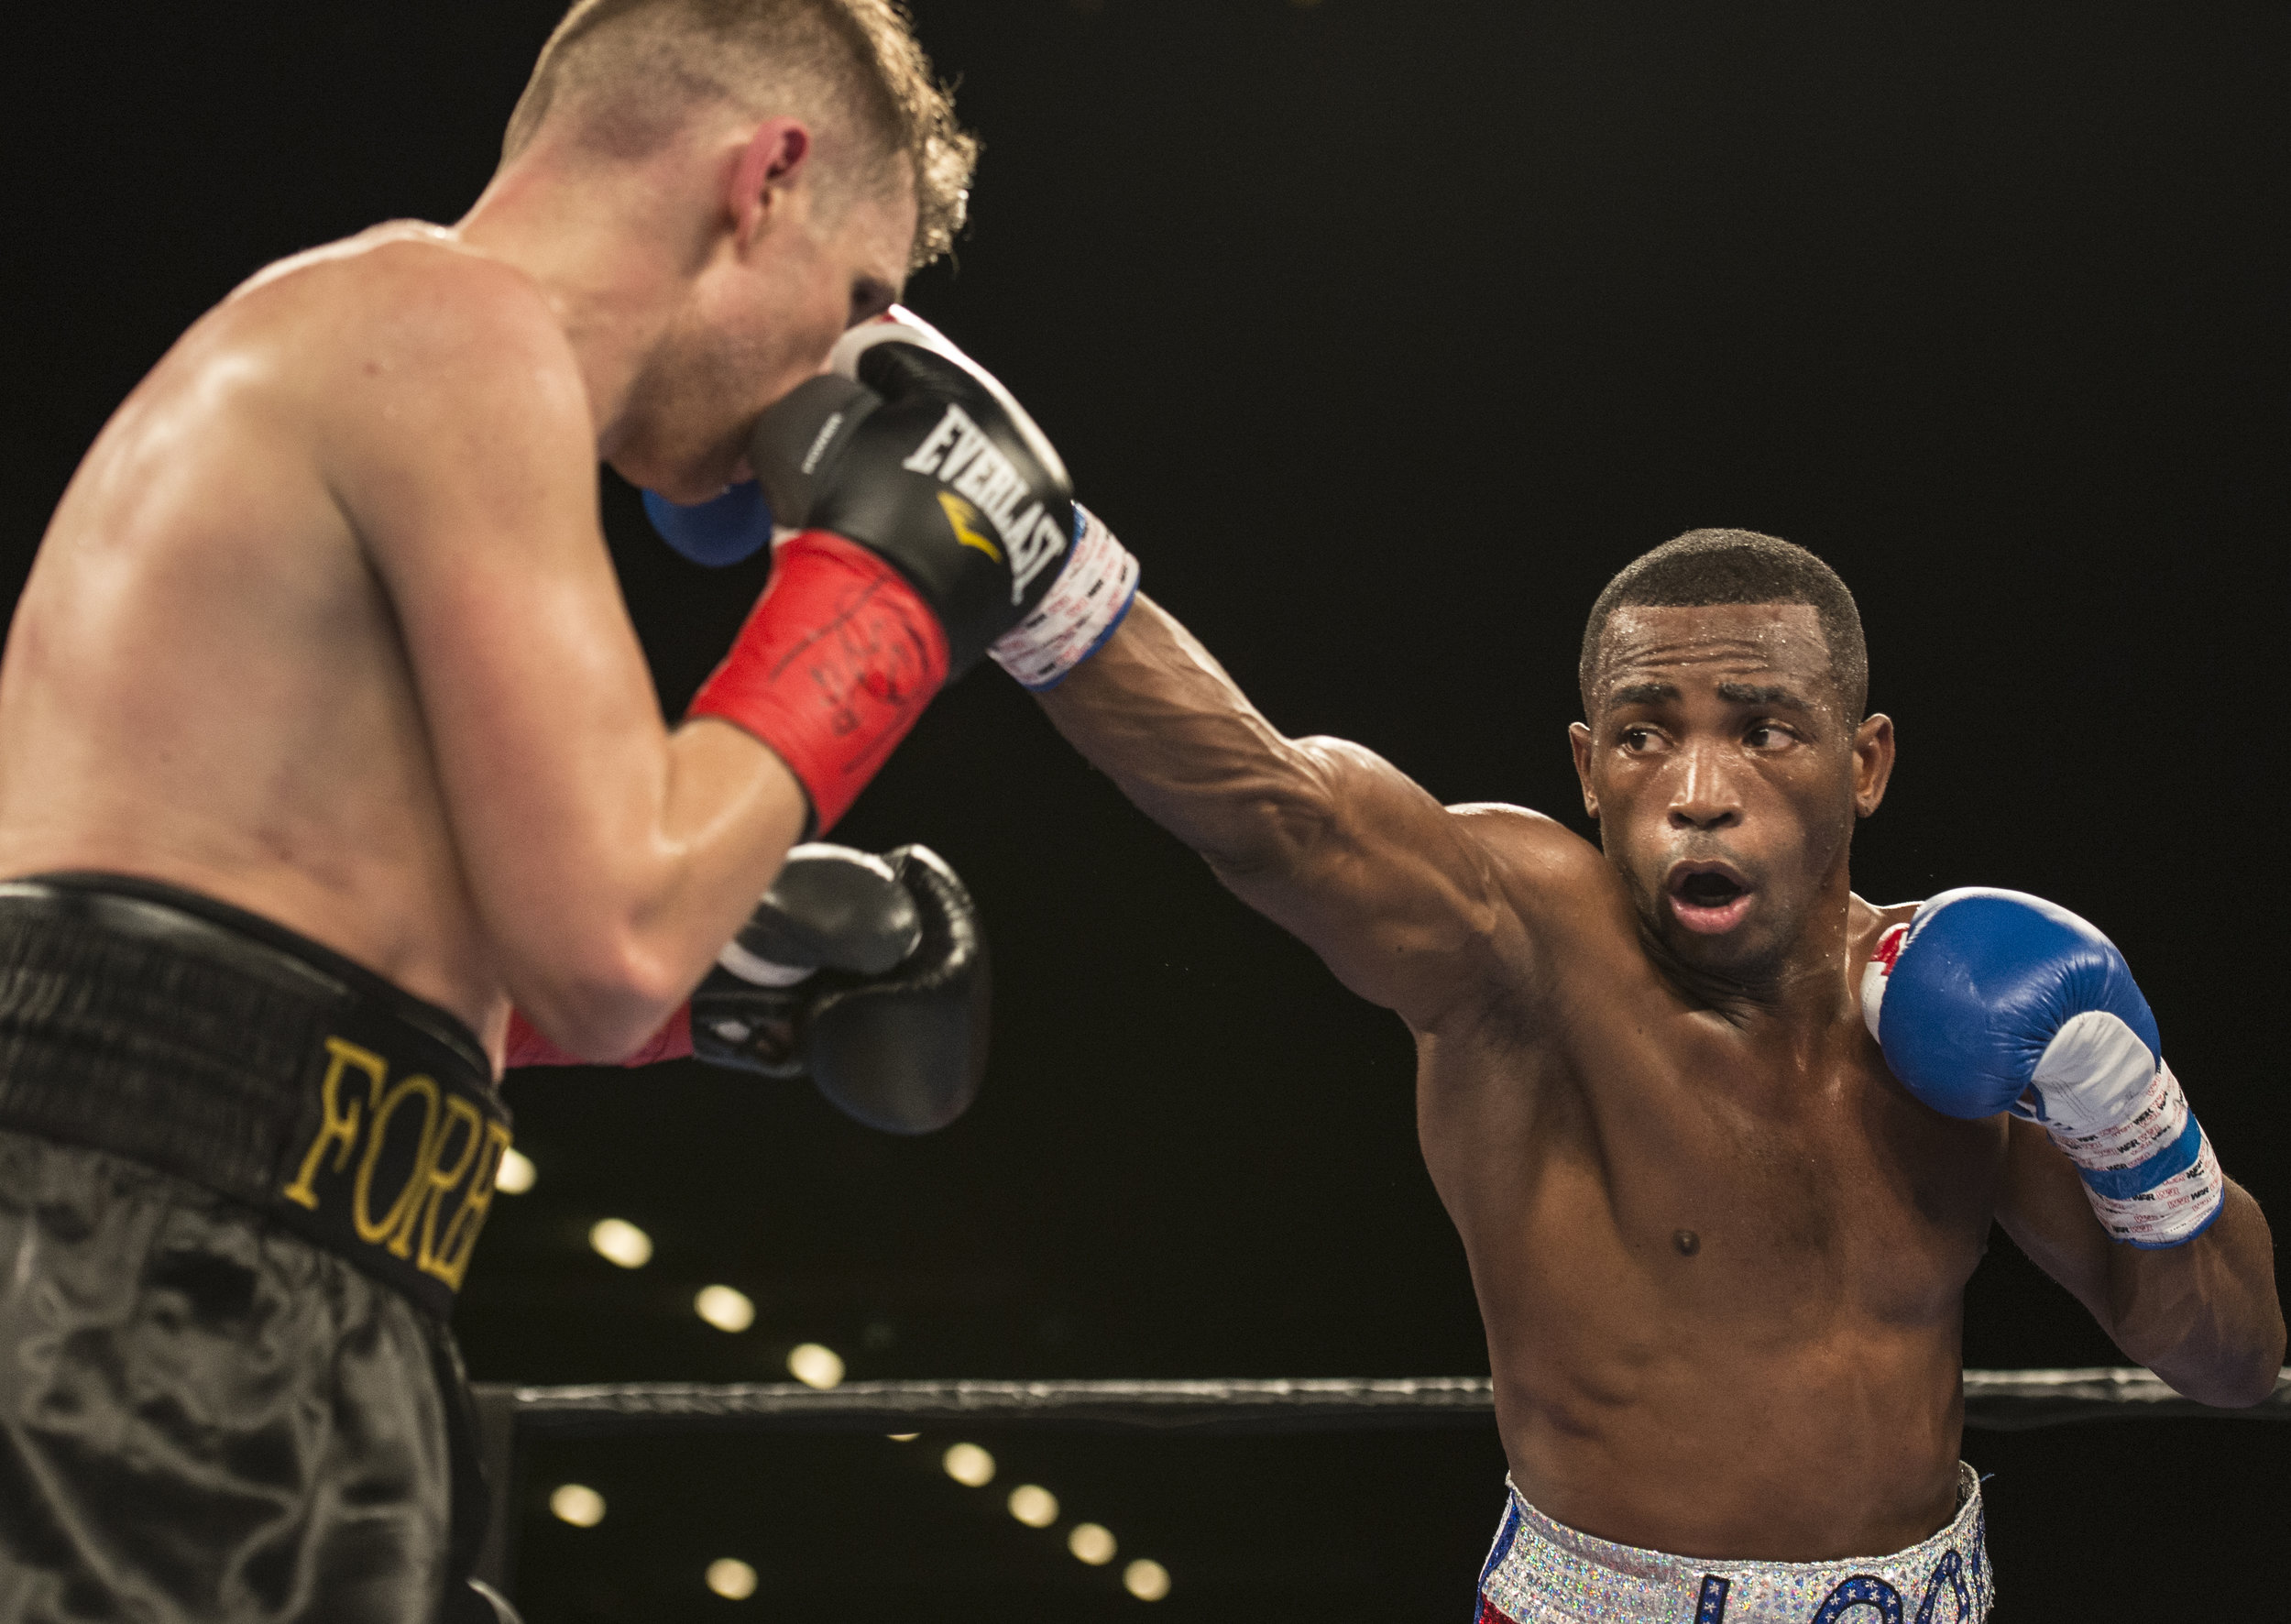  Cuban boxer Erislandy Lara attempts to connect with a jab during his fight against Yuri Foreman at Hialeah Casino Park. 